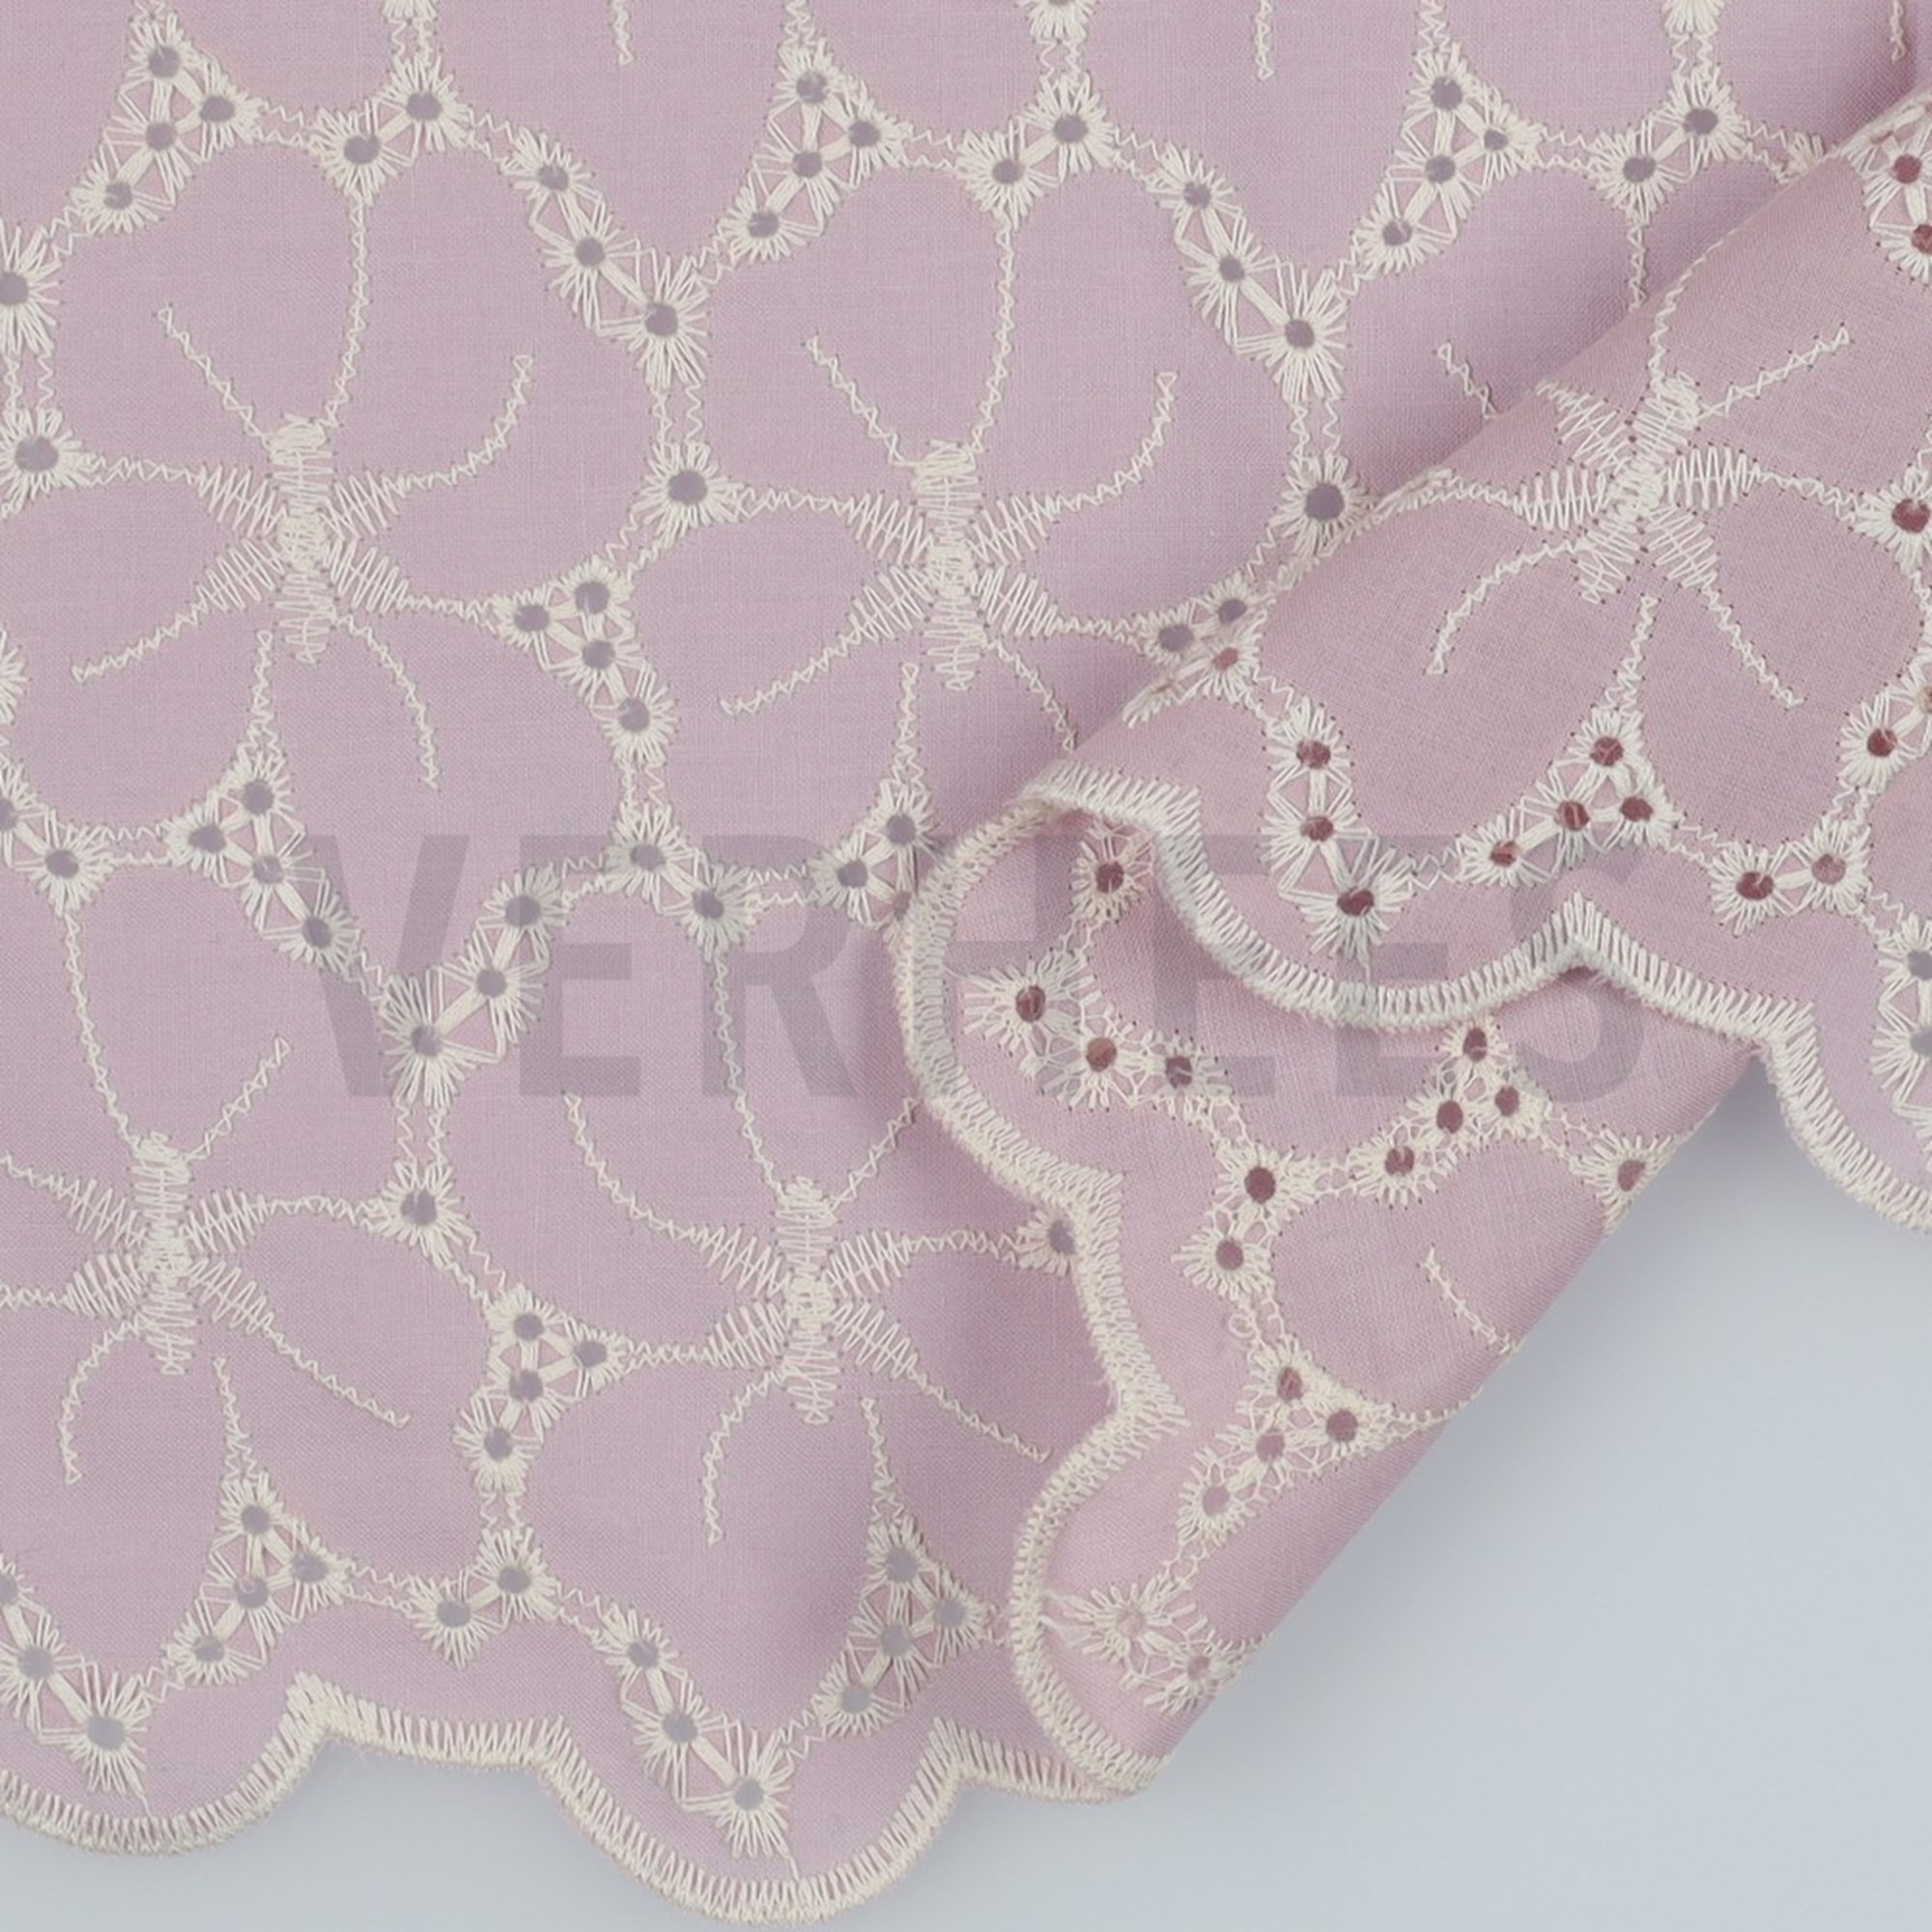 COTTON EMBROIDERY 2-SIDE BORDER CHERRY BLOSSOM (high resolution) #3